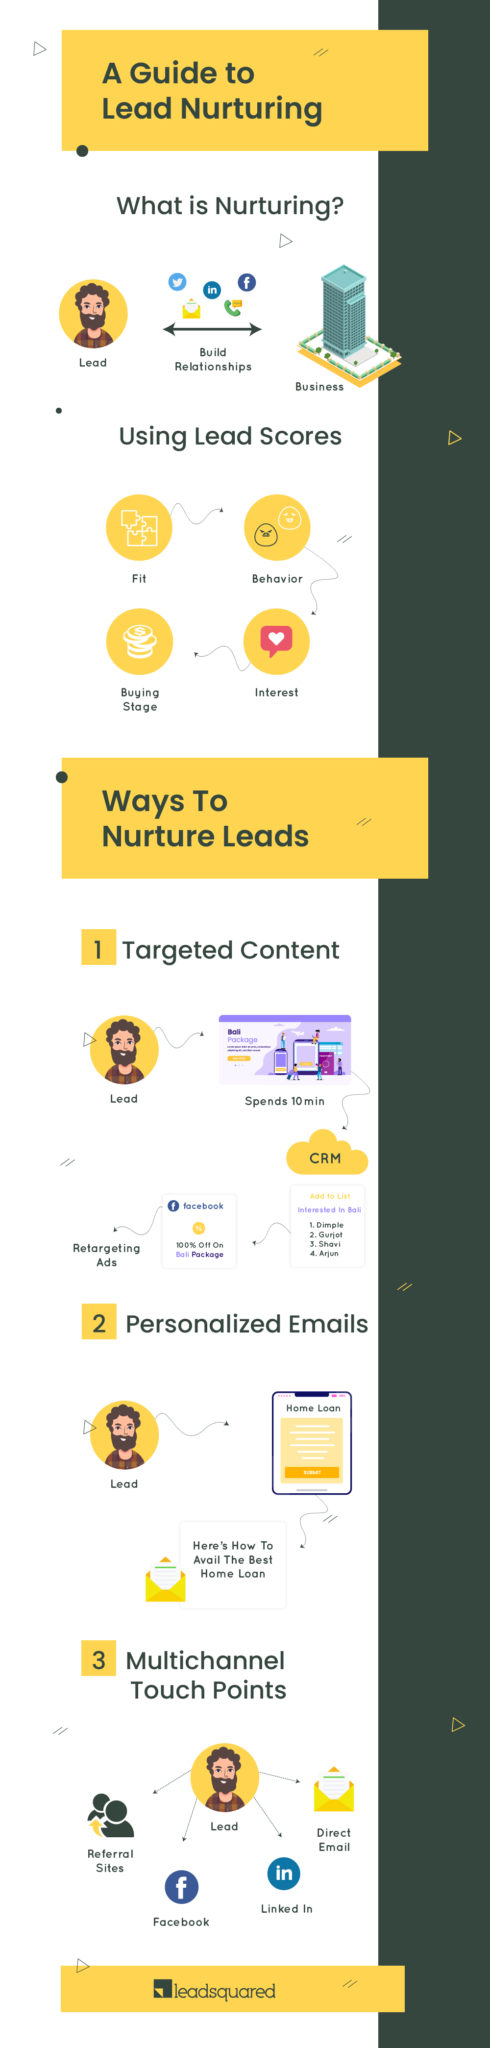 A guide to lead nurturing infographic